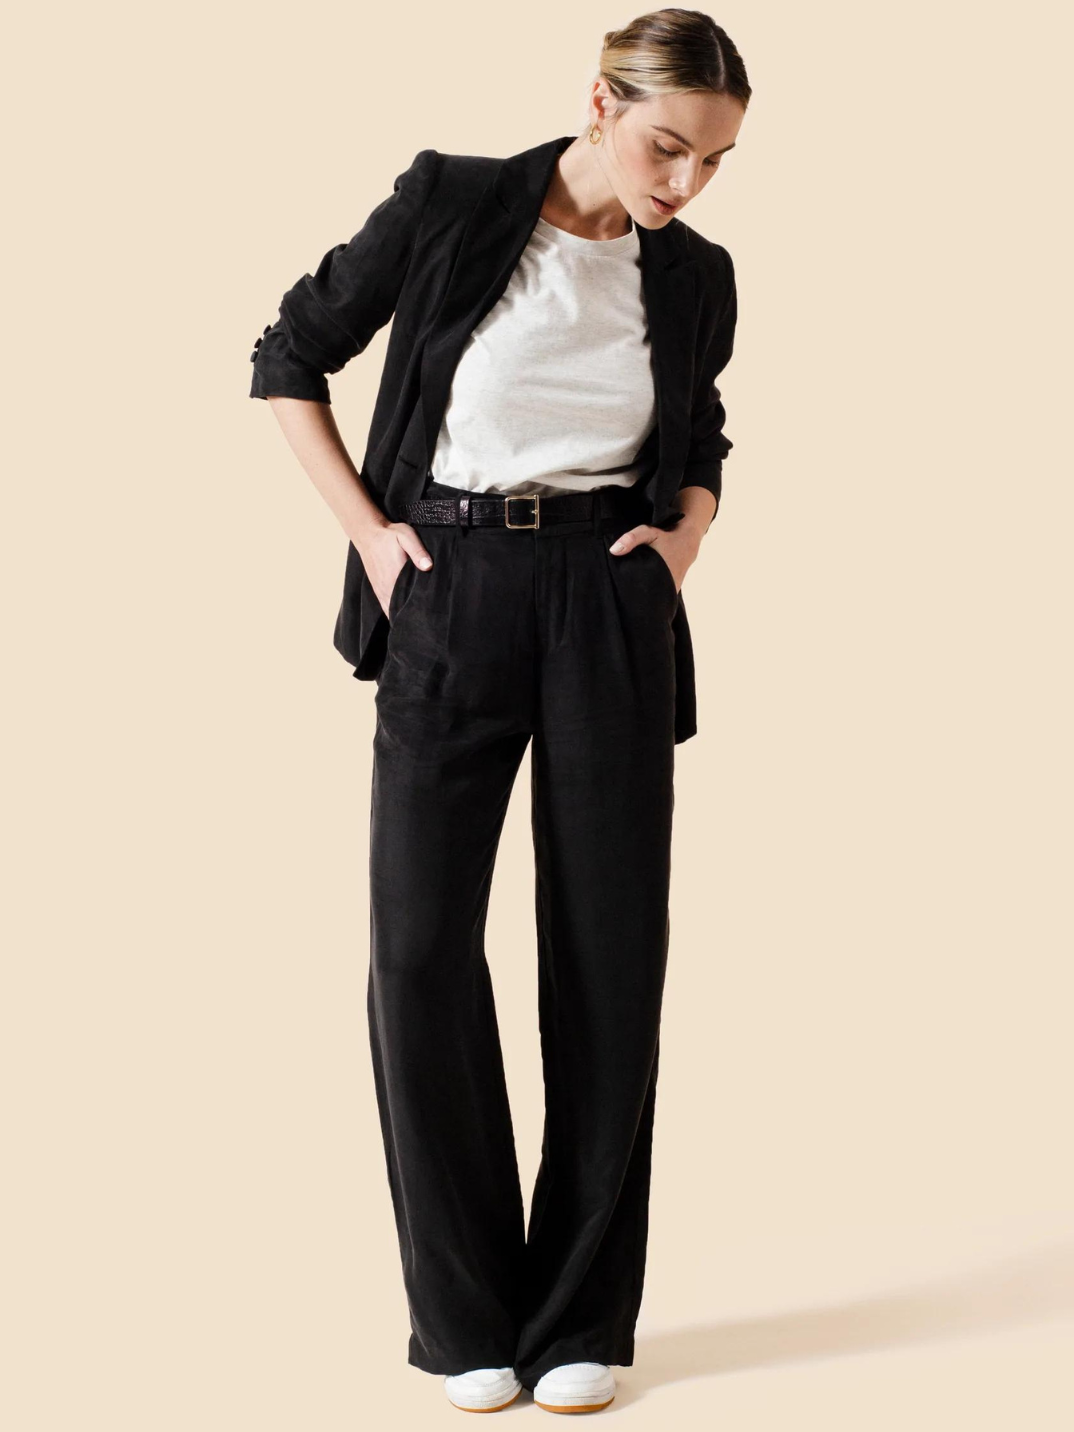 No capsule wardrobe is complete without that perfect pair of wide leg pants. Cut from an ultra-soft, lightweight natural fiber, the Willow Wide Leg Pants are a high-waisted design that elongate the silhouette. Featuring an elastic back waistband and side pockets, these pants guarantee tailored comfort. Ideal for an effortlessly cool look with sneakers, or occasion dressing with heels. 